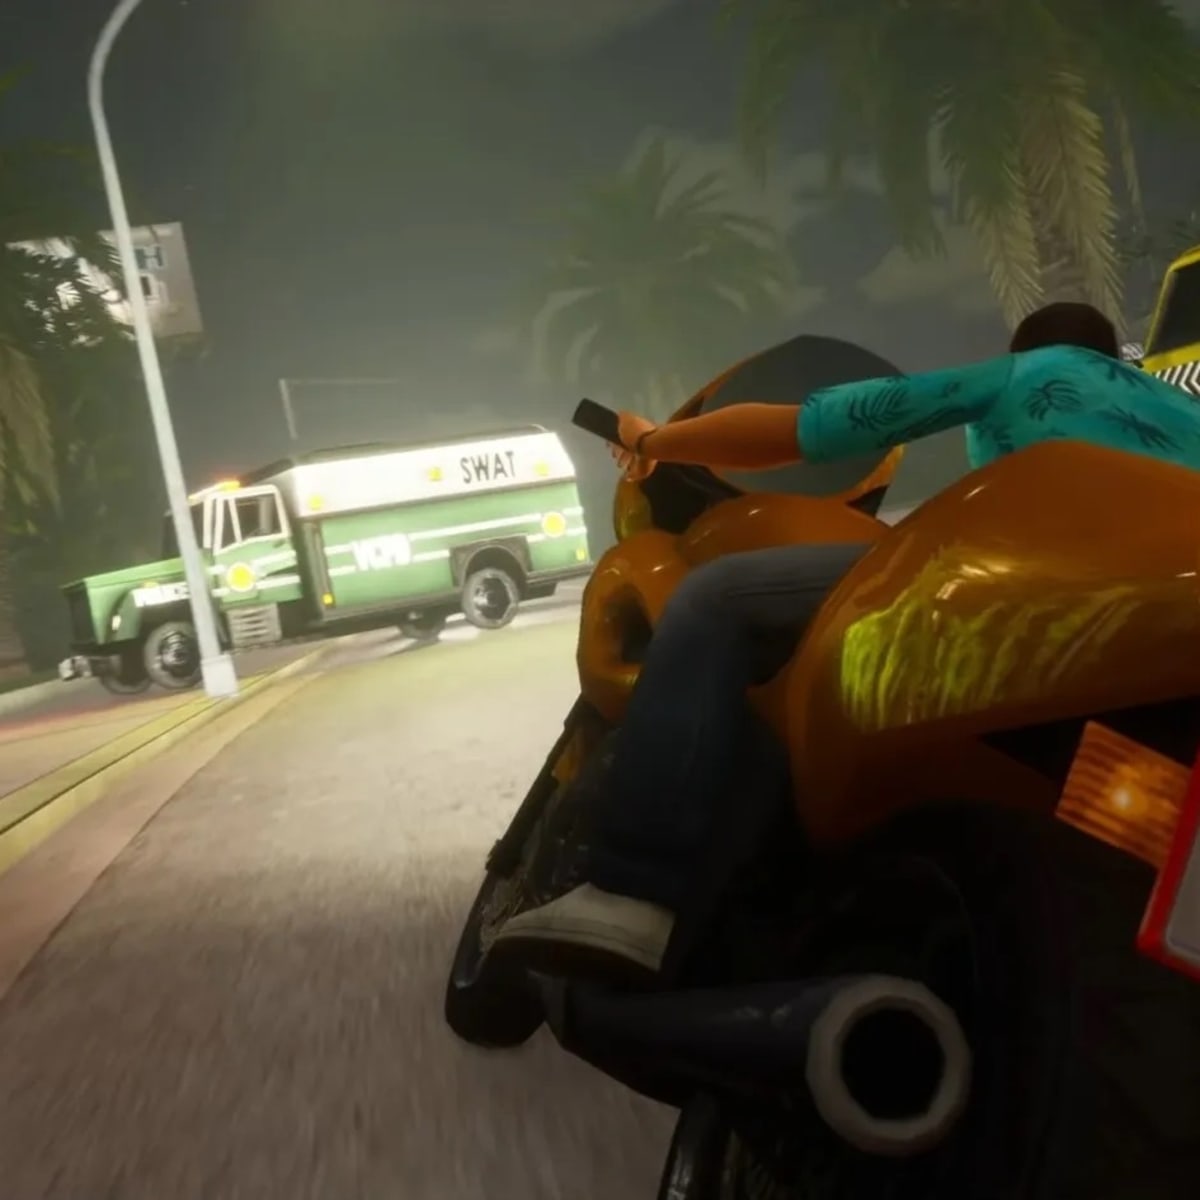 A player leaked a snippet from the GTA 6 trailer. It's a fake